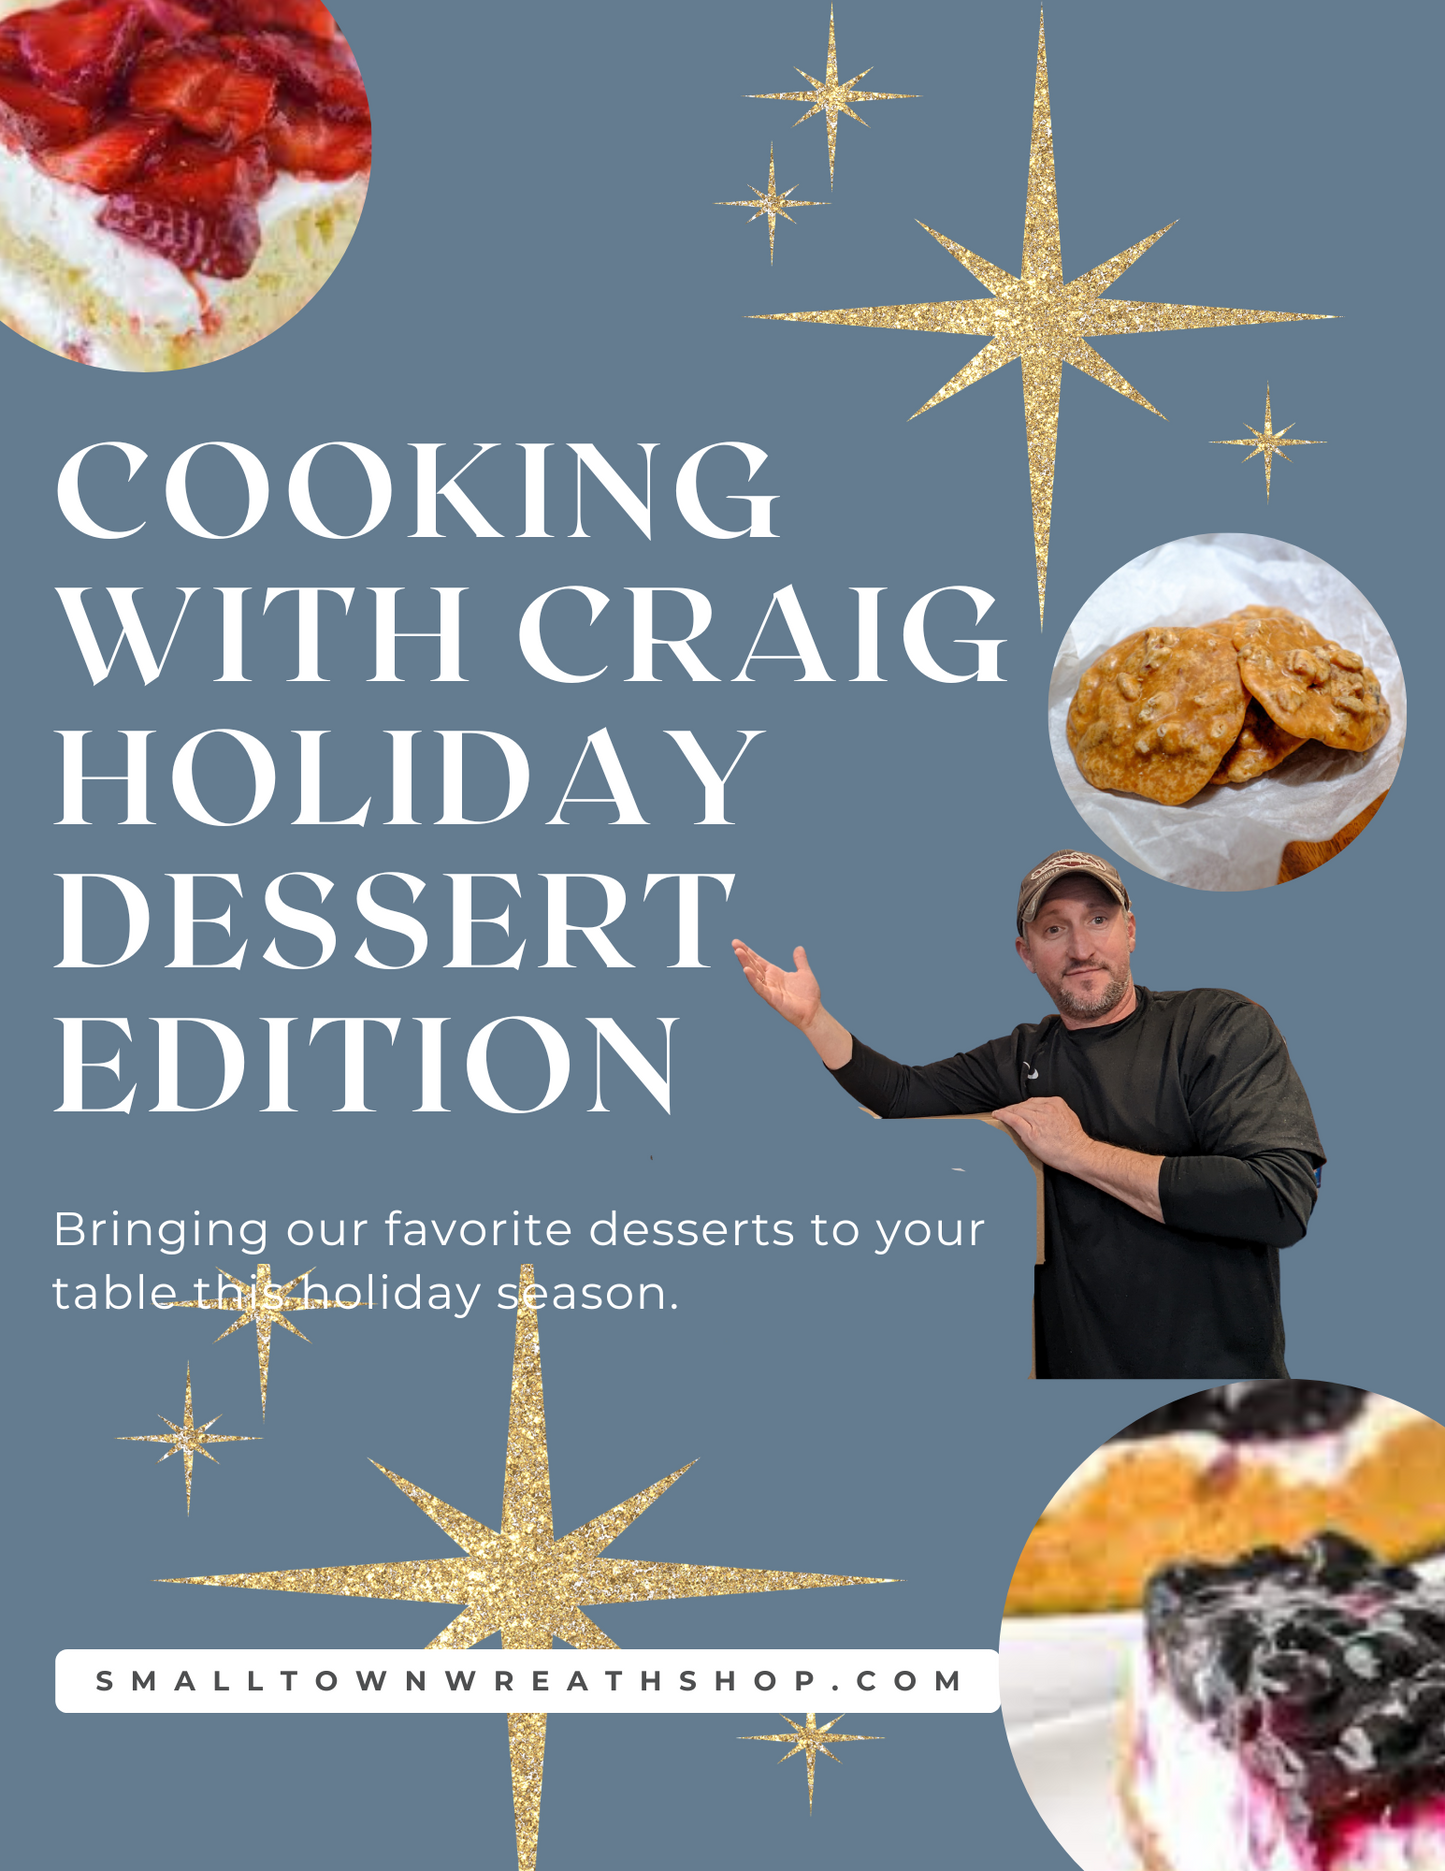 Cooking with Craig Holiday Dessert Edition E-Book